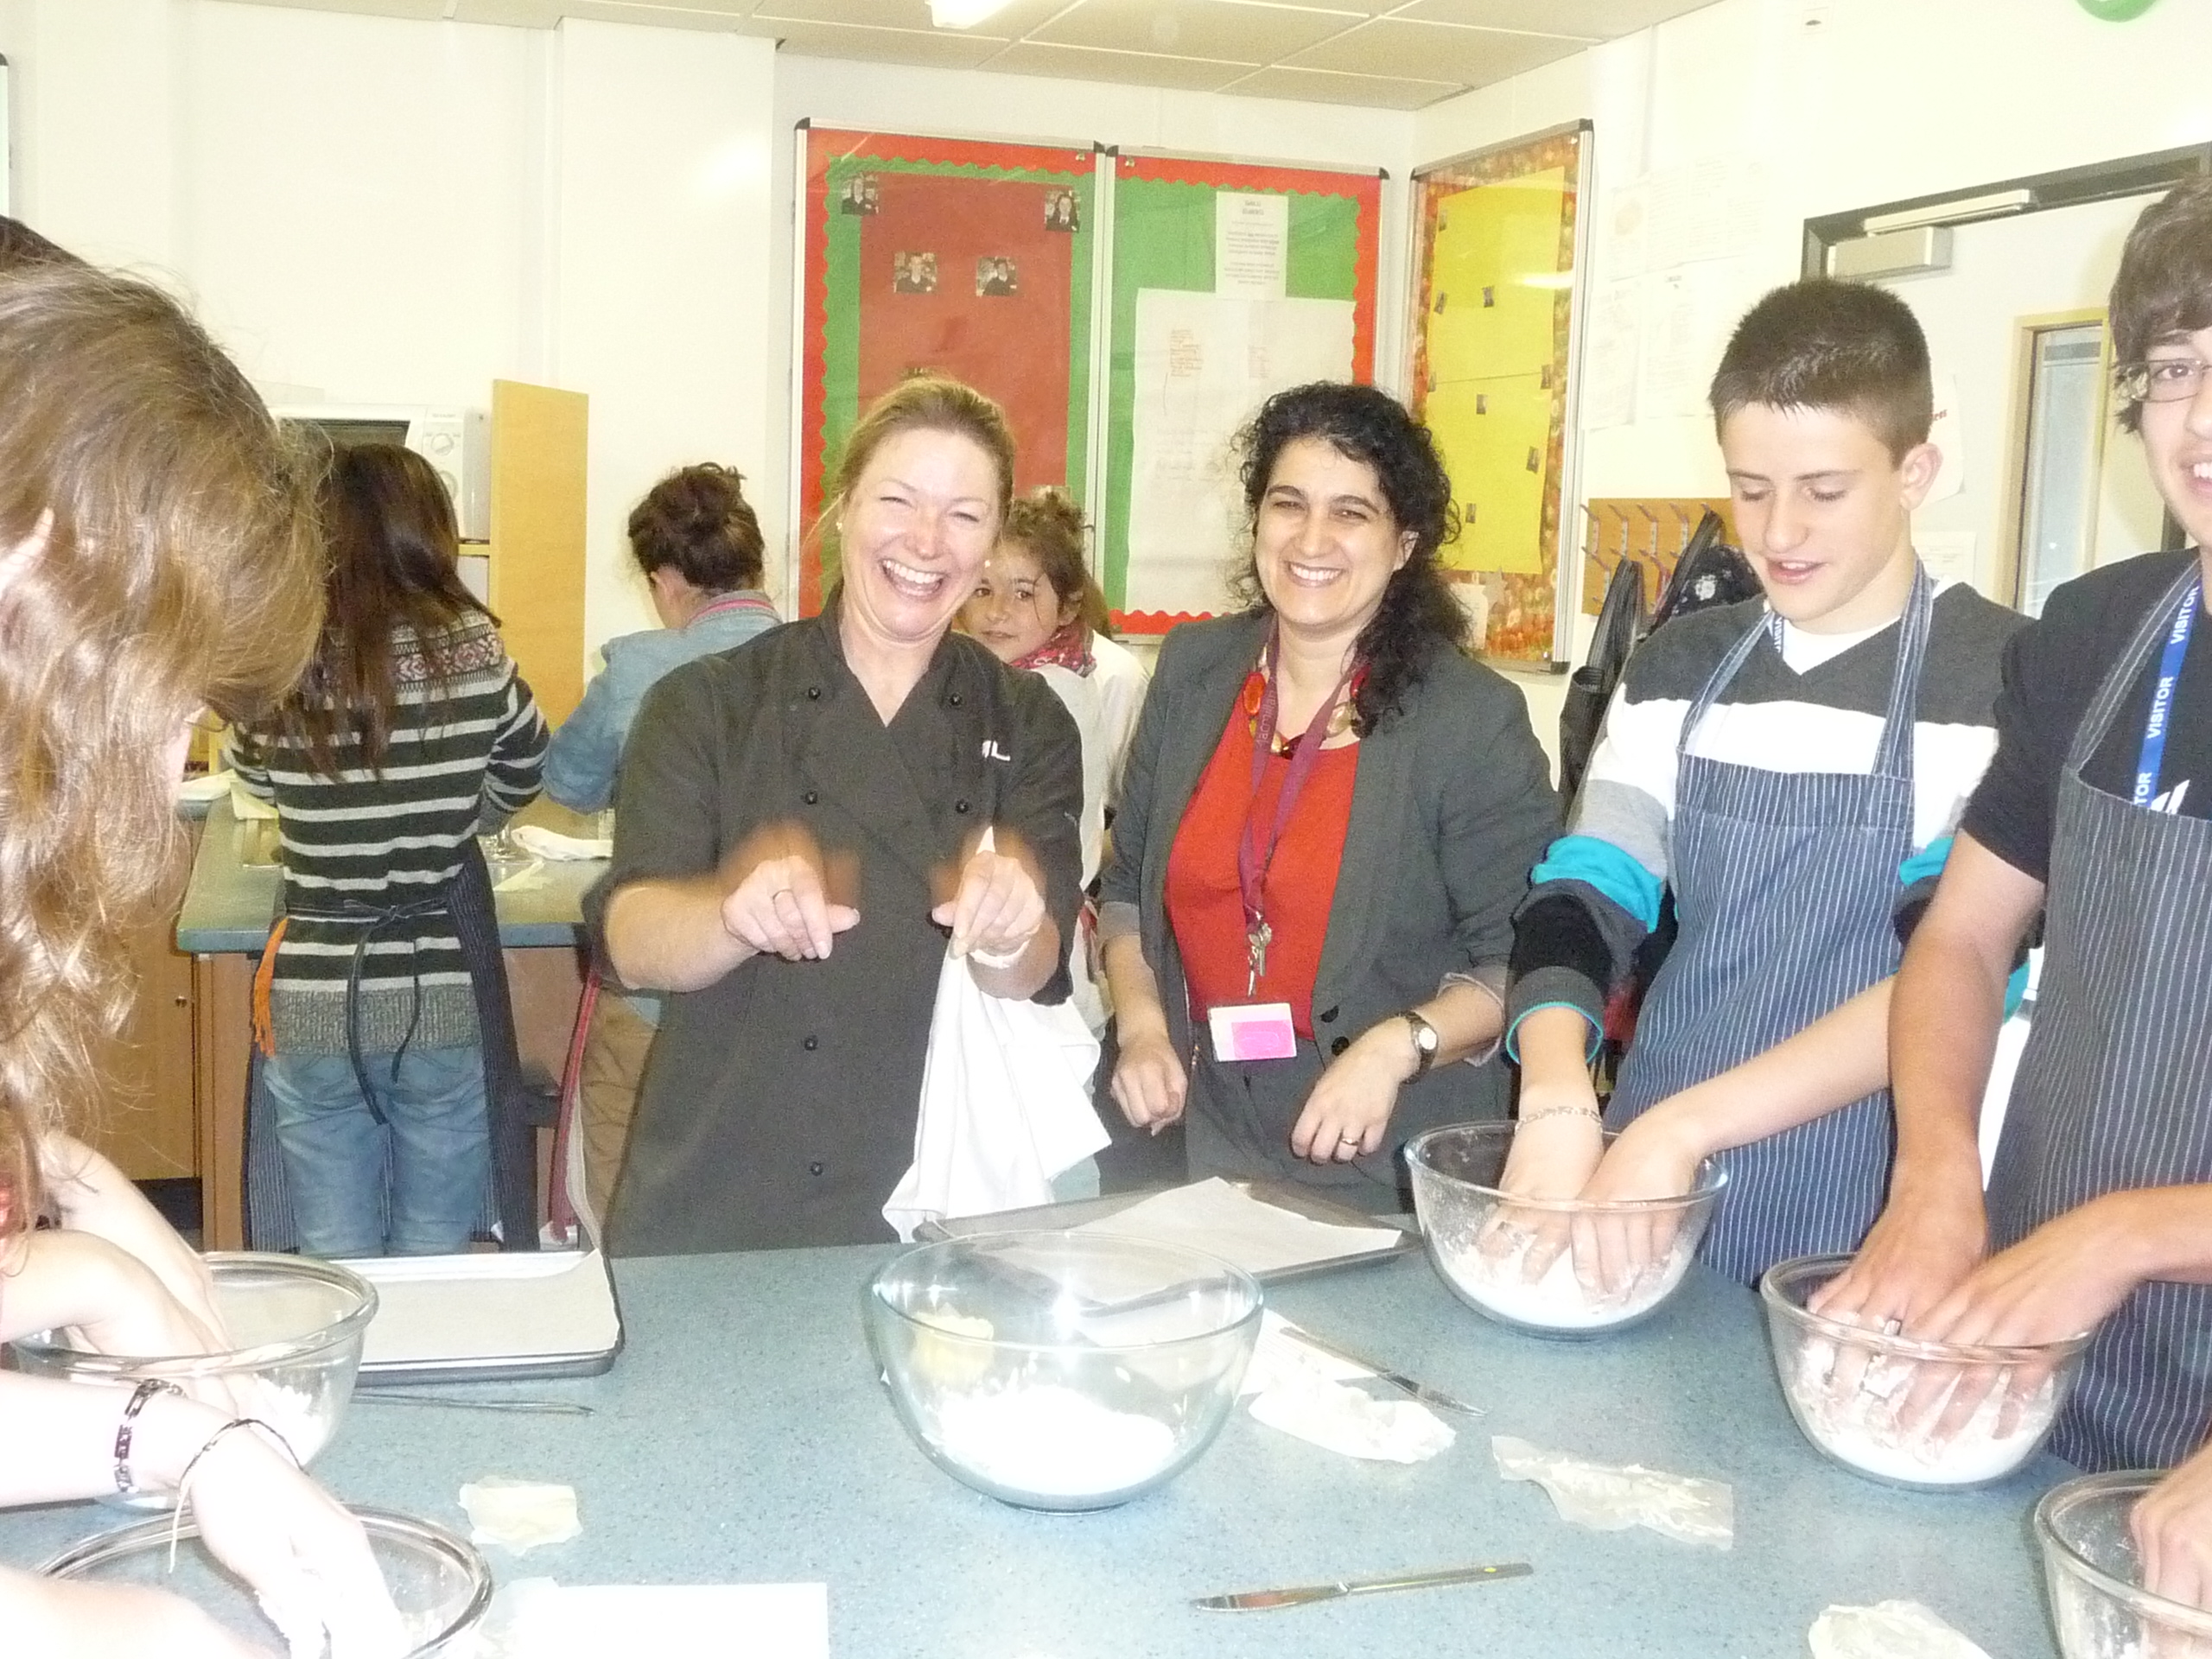 The cooking class in Macmillan Academy